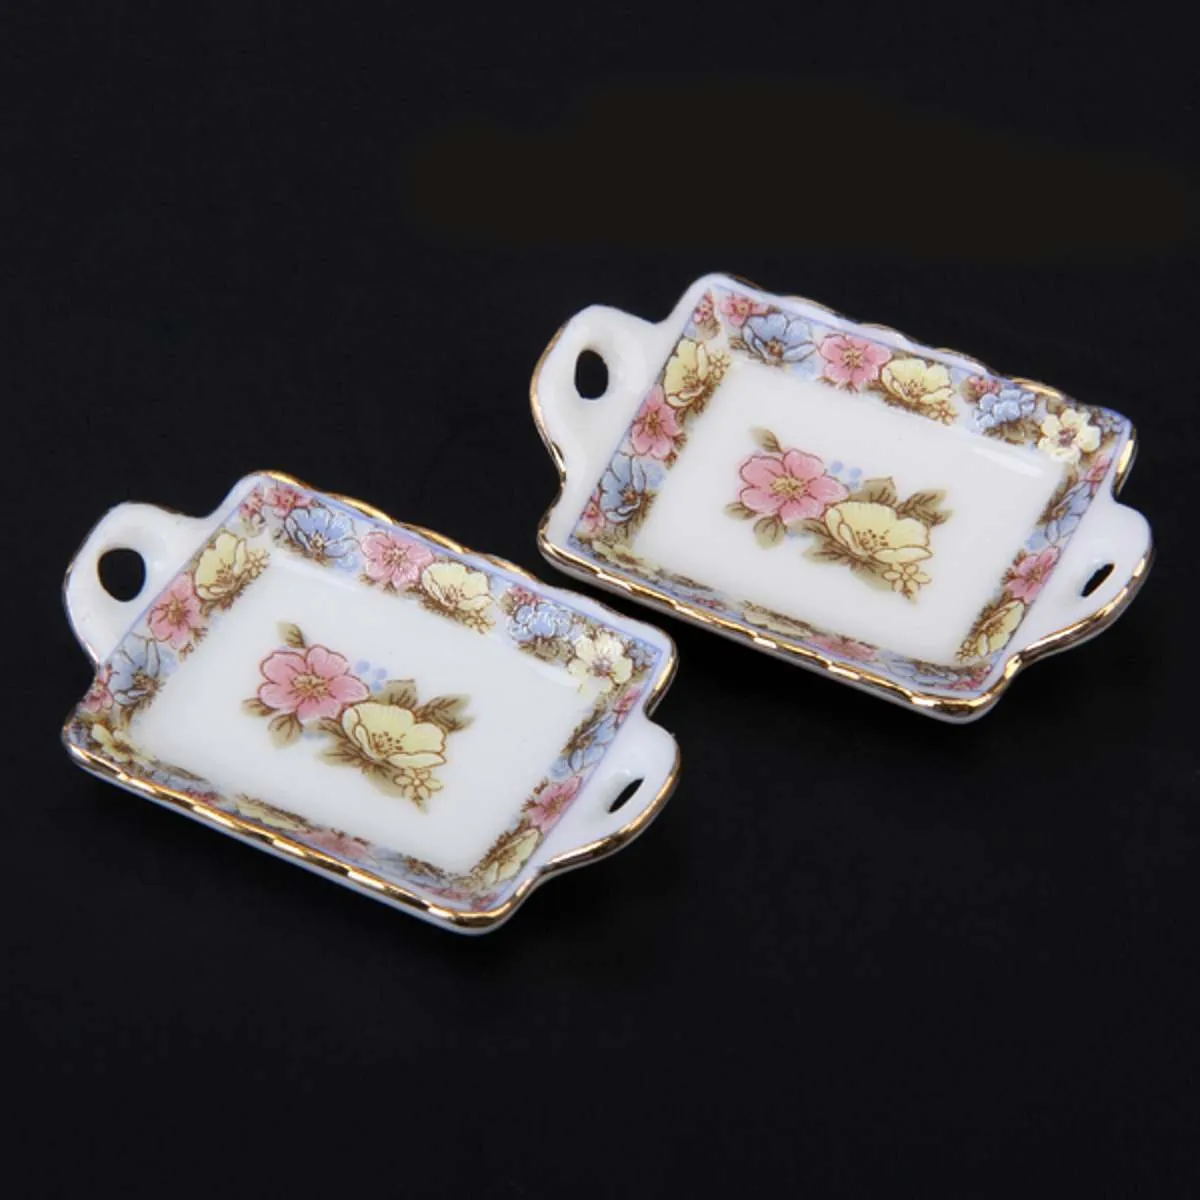 Dollhouse Miniature Dining Ware Porcelain Tea Set Dish Cup Bowl Plate Furniture Toy Gift Colorful Floral Print Table Decor Y5230580